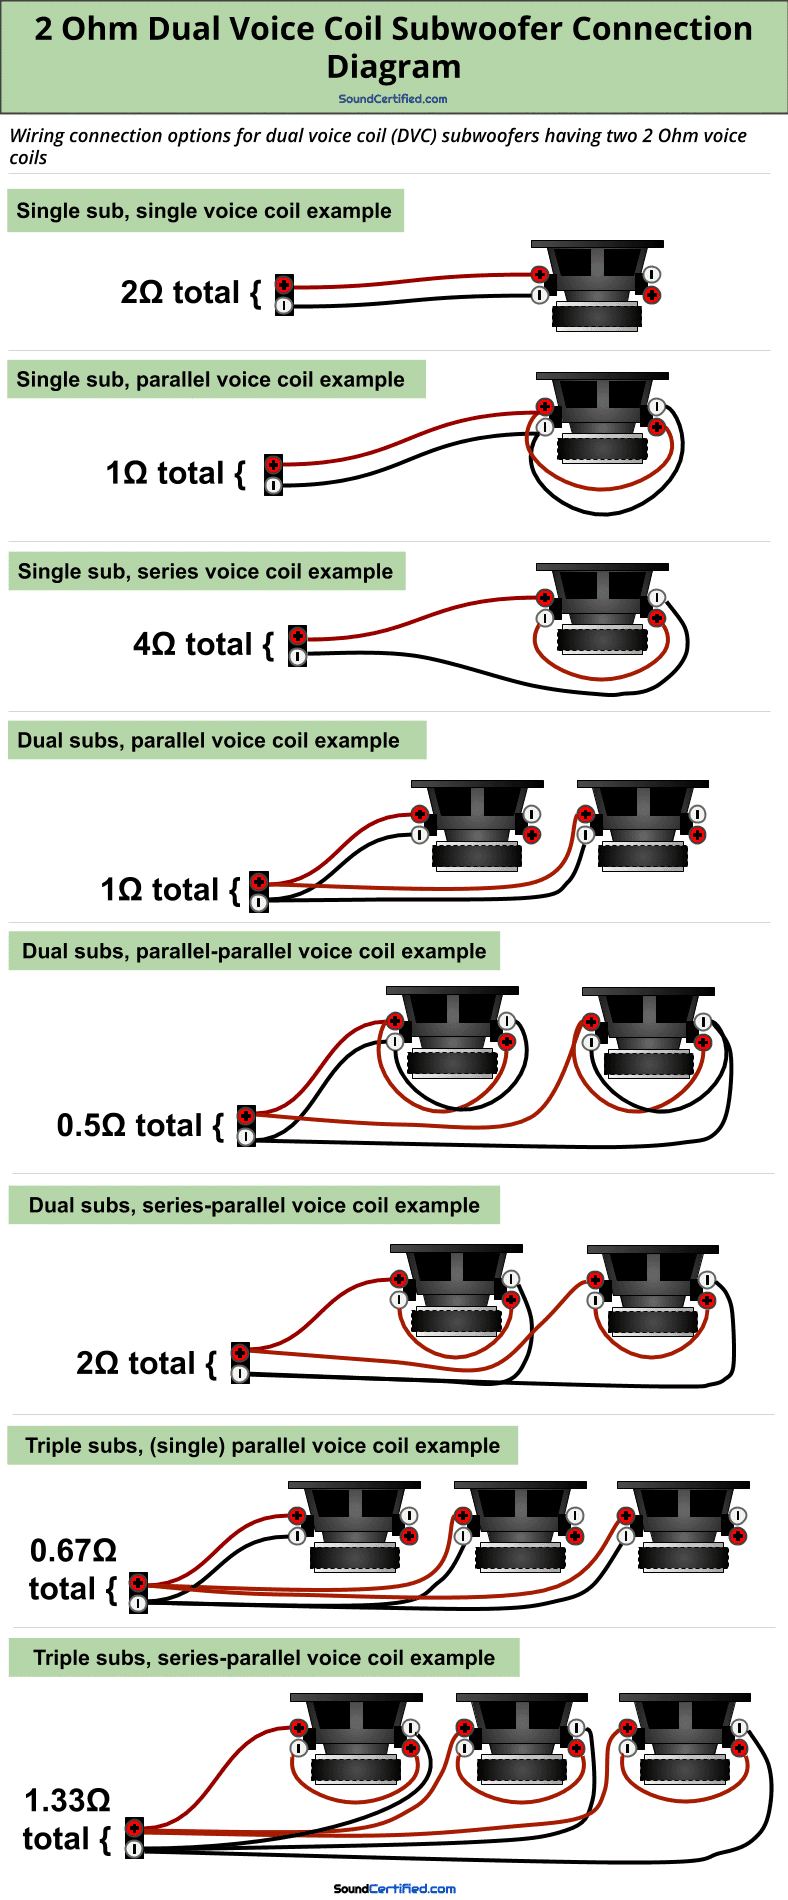 2 Ohm dual voice coil subwoofer wiring diagram